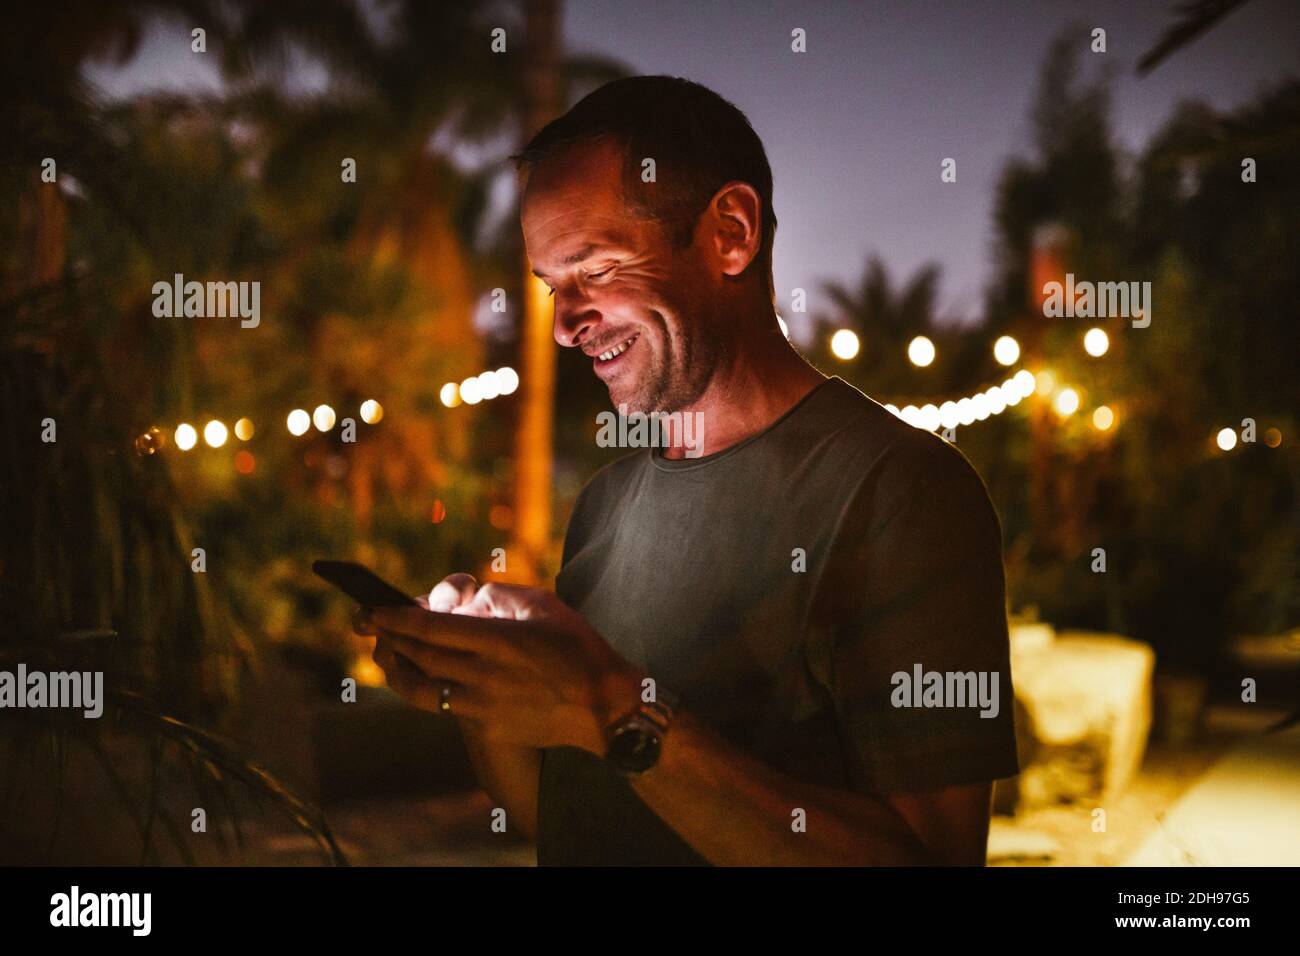 Smiling man using phone against sky during sunset Stock Photo